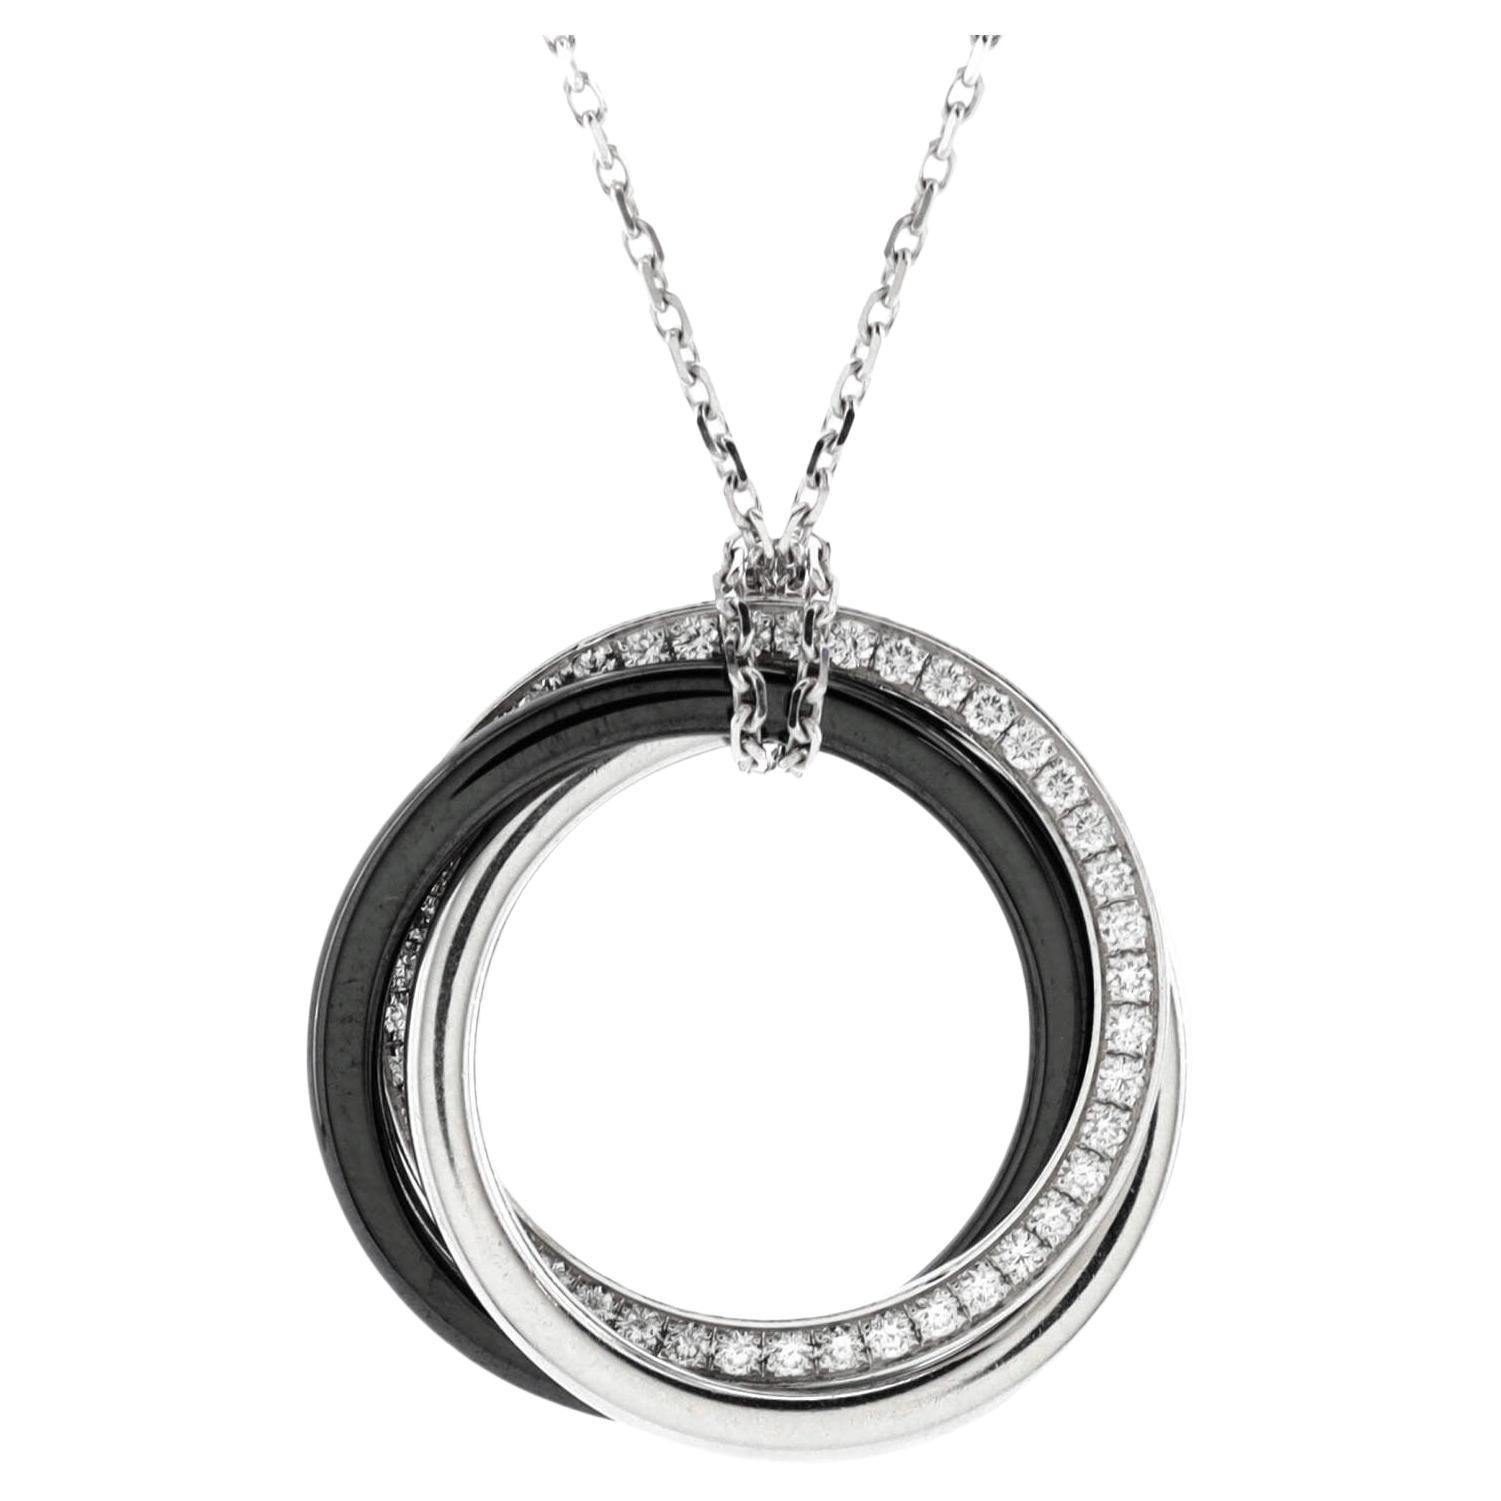 Cartier Trinity Pendant Necklace 18K White Gold with Diamonds and Ceramic Small